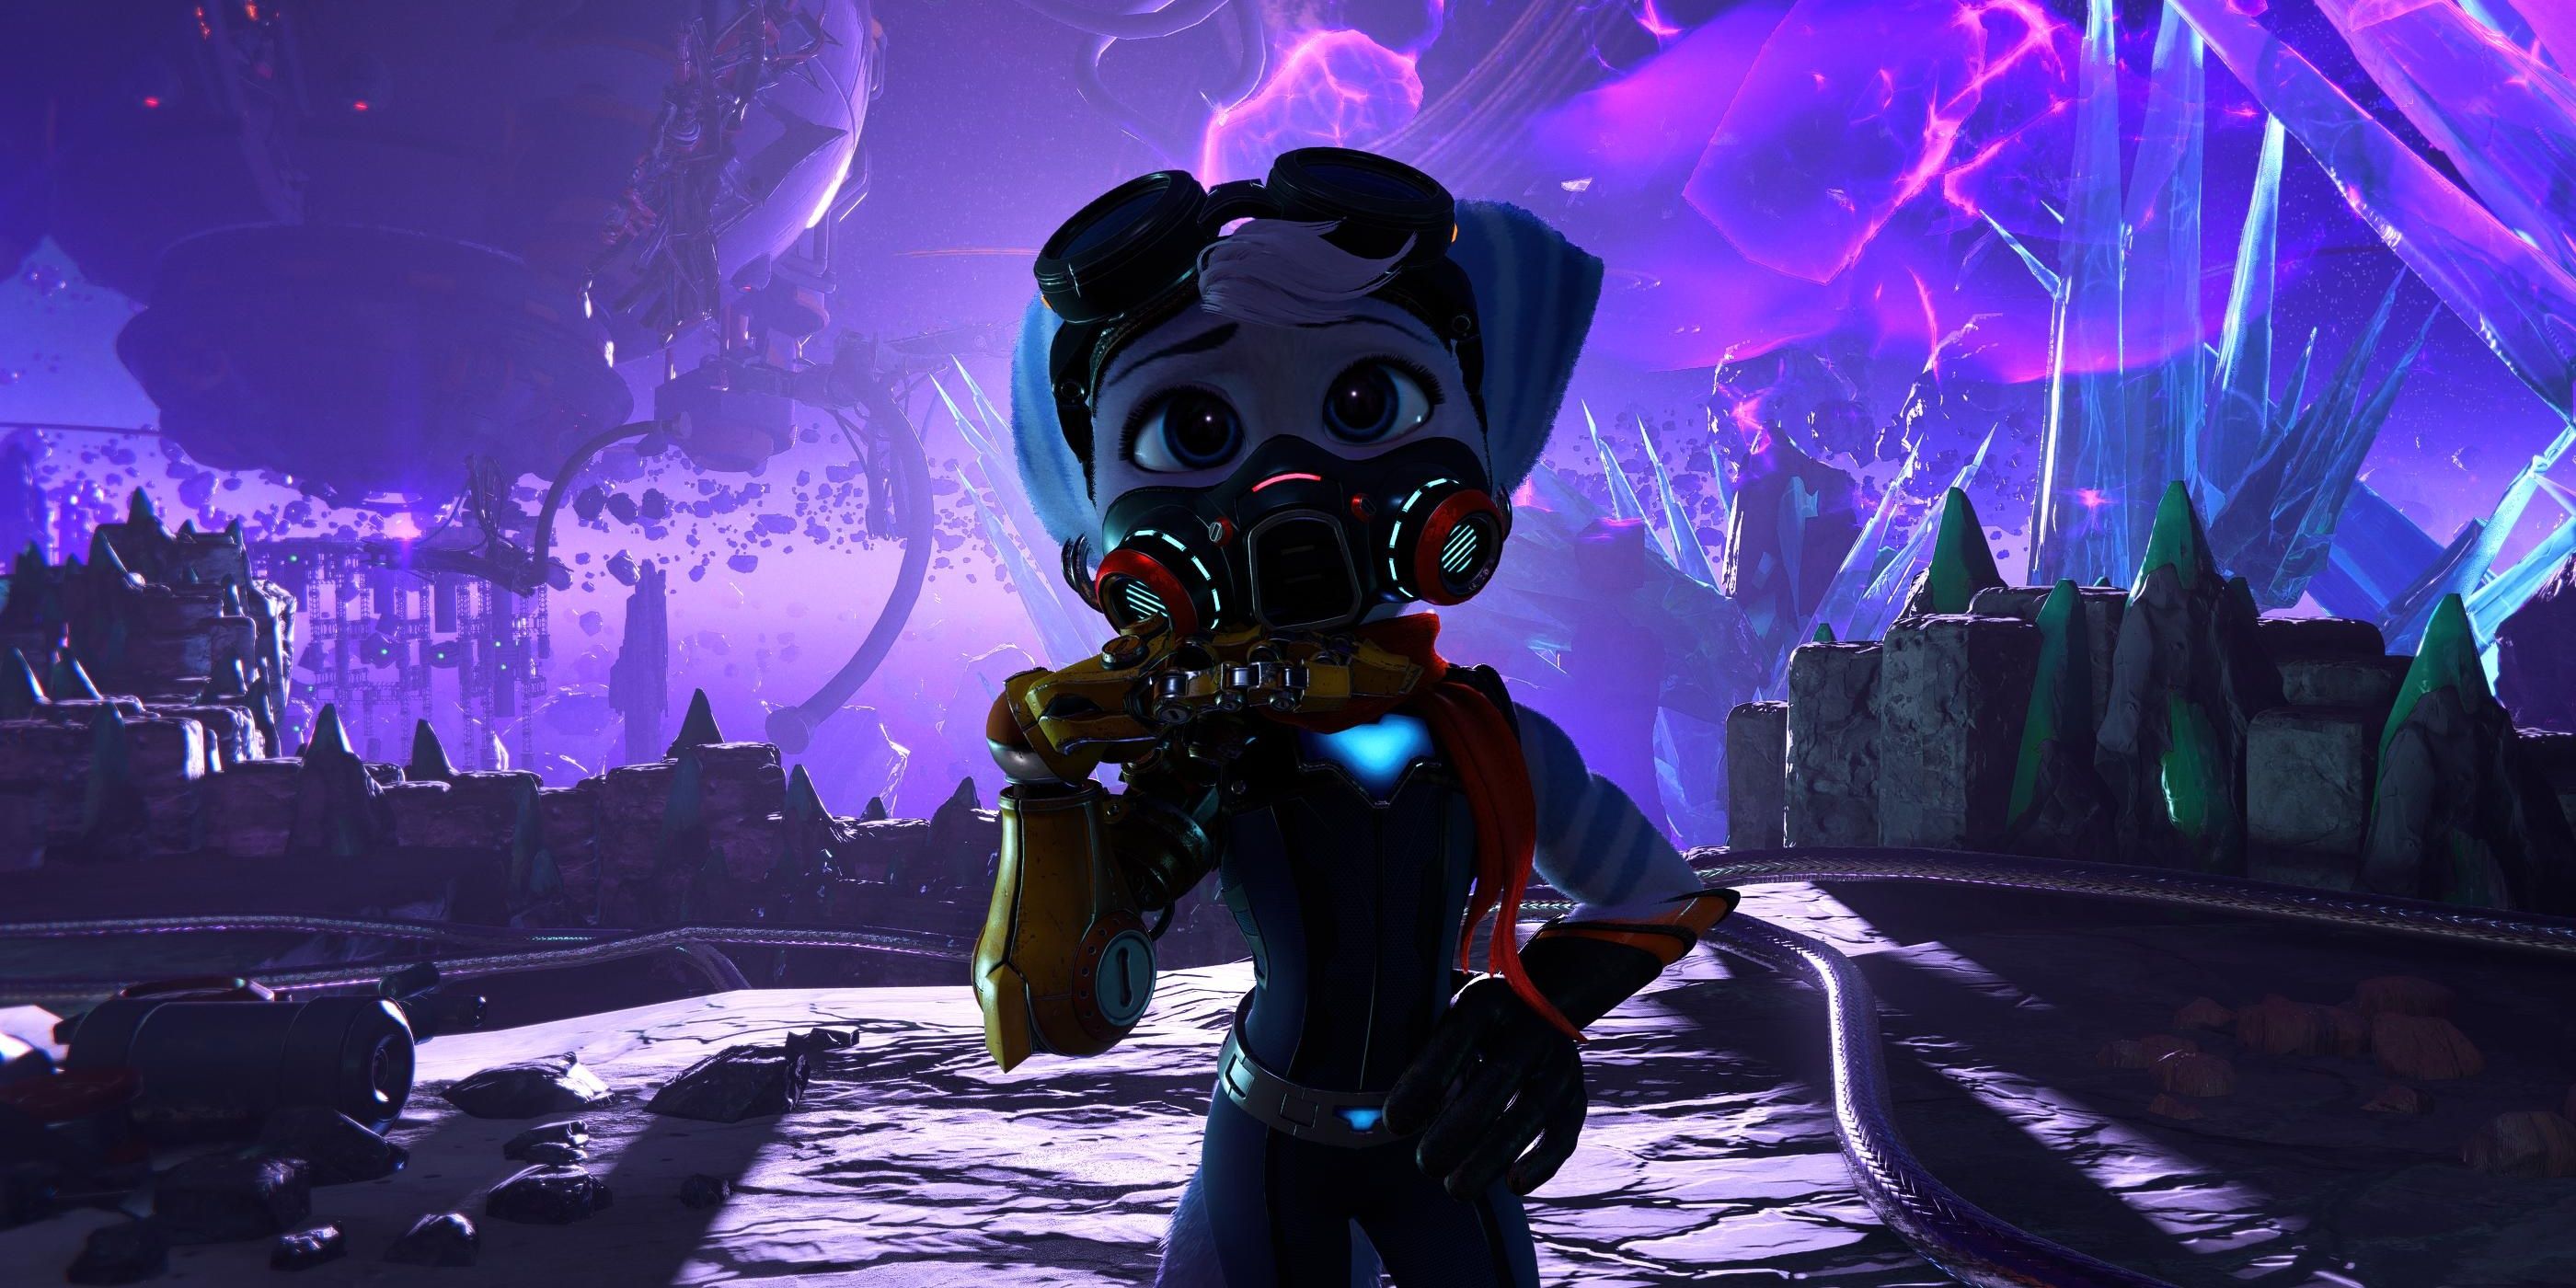 Rivet posing in front of a gorgeous purple sky in Ratchet and Clank: Rift Apart